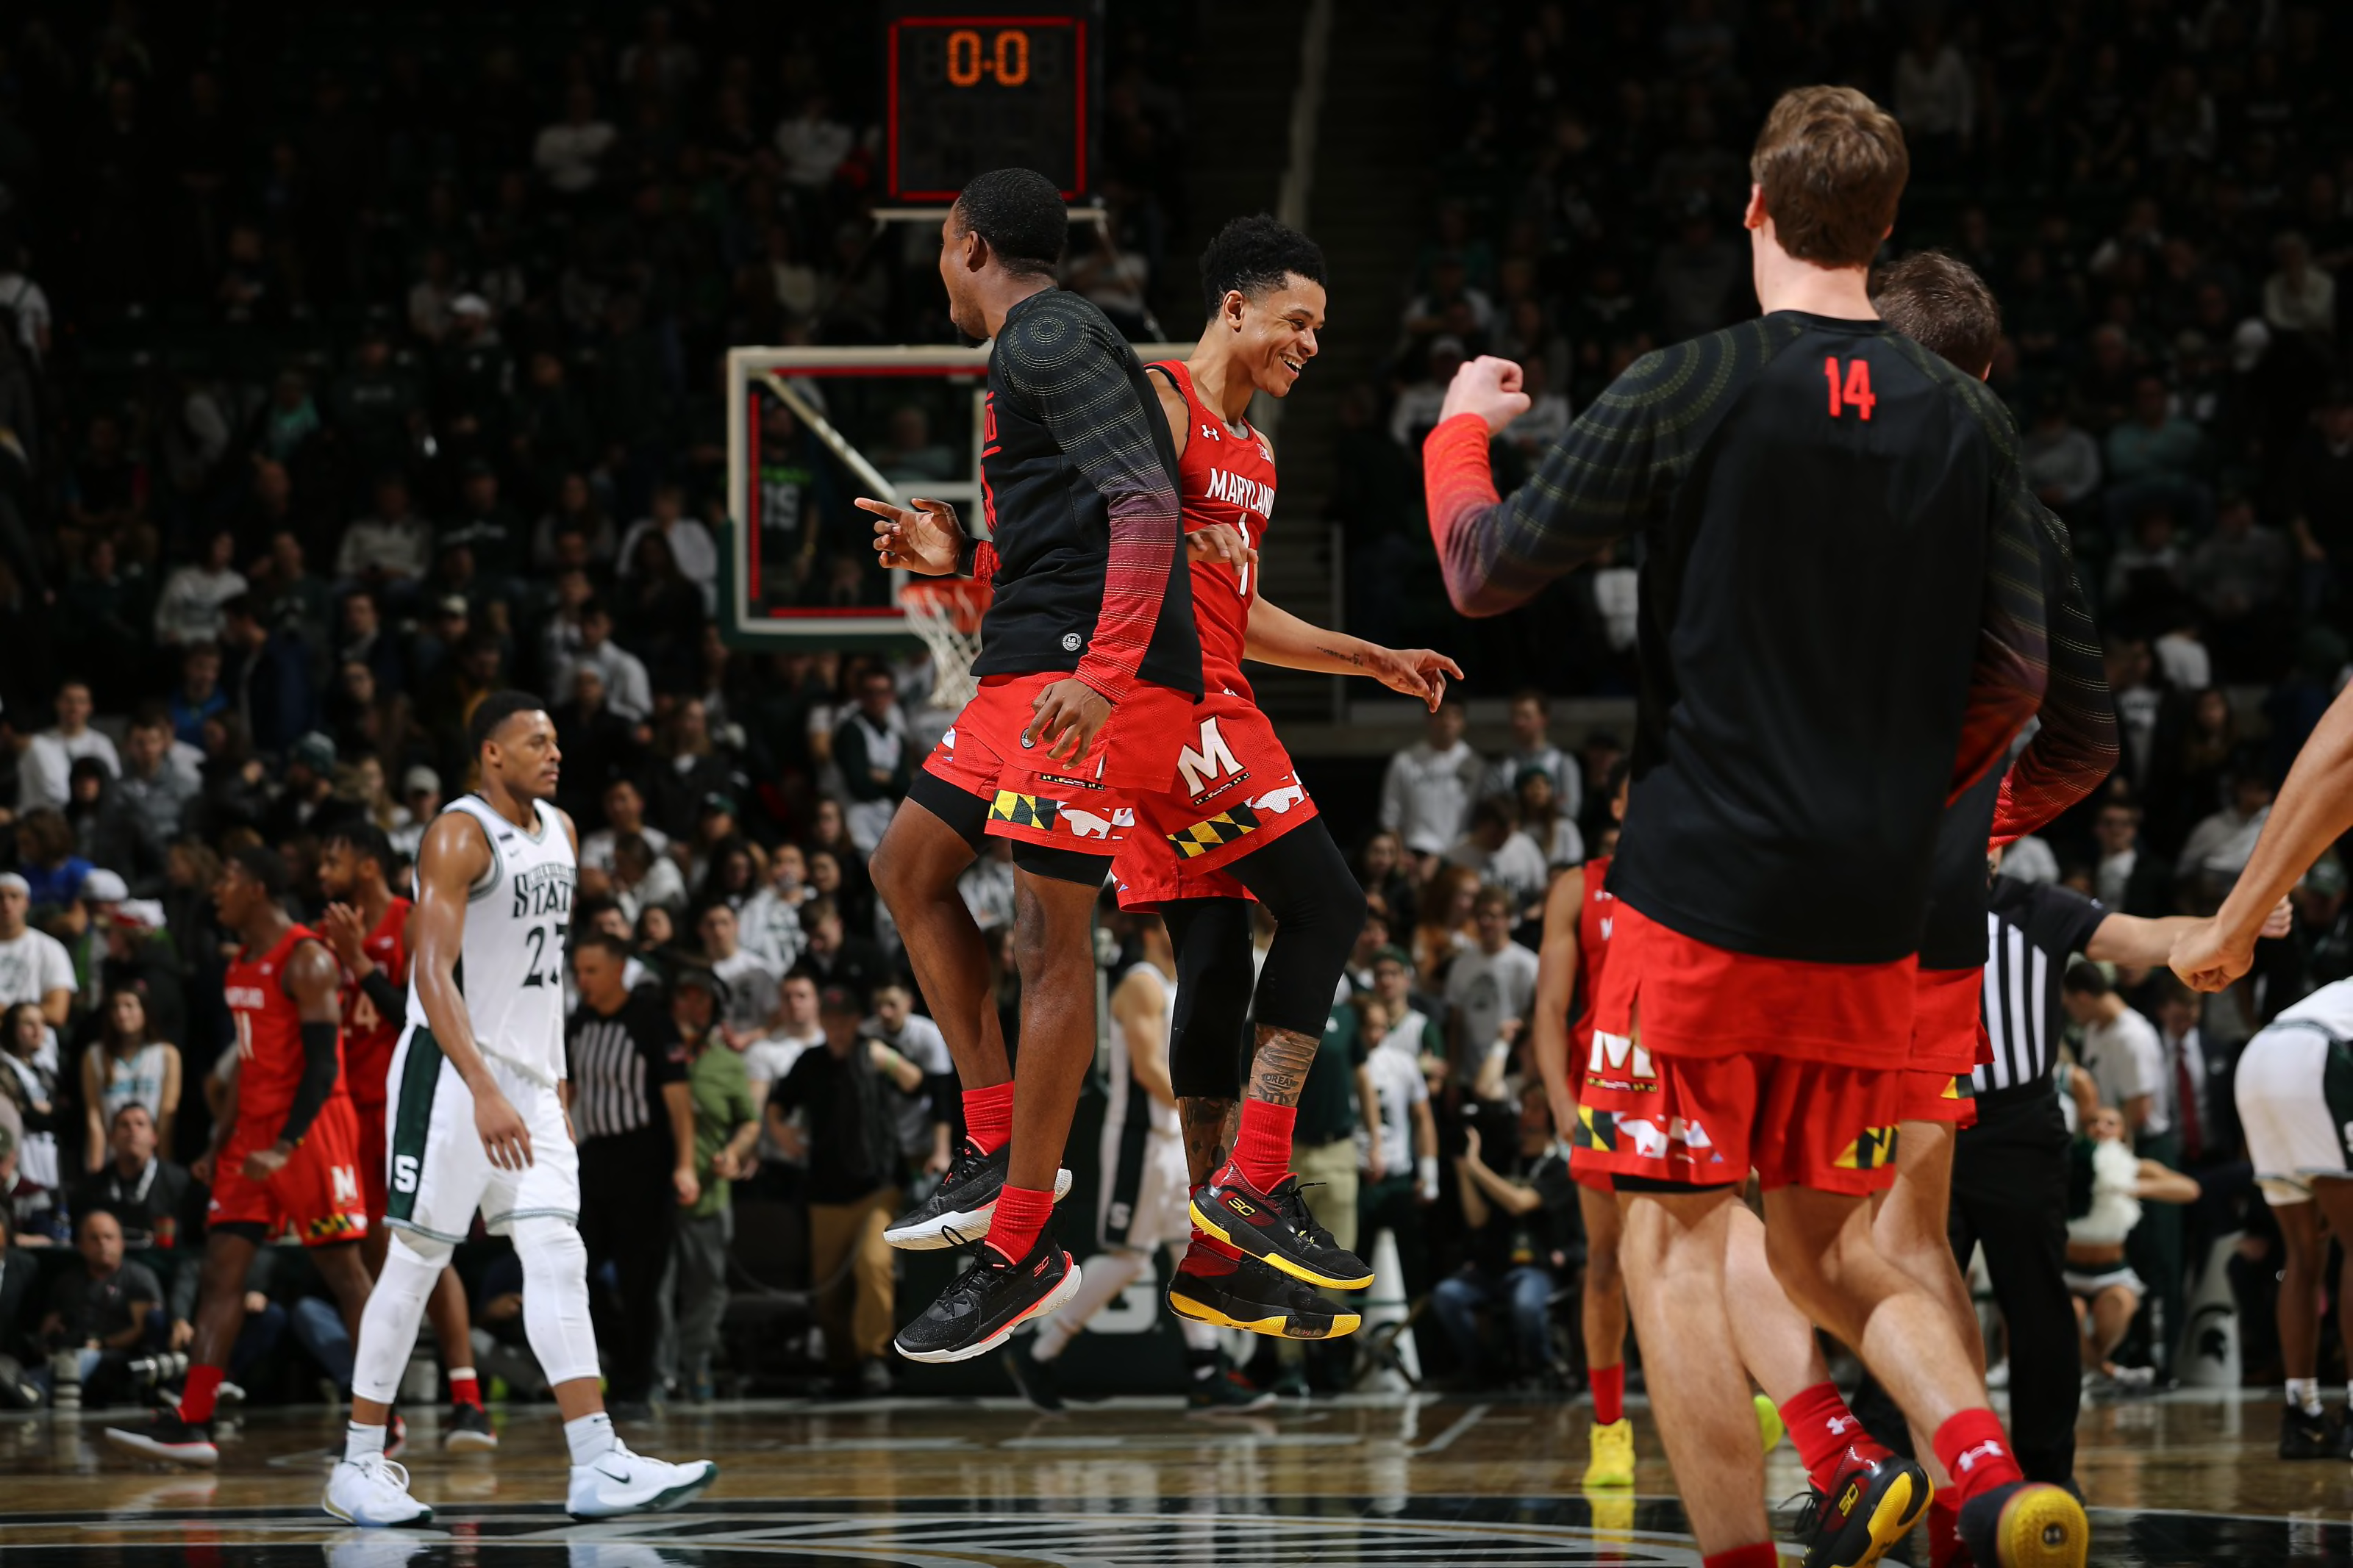 Maryland basketball: Terps get 8th straight after win over ...